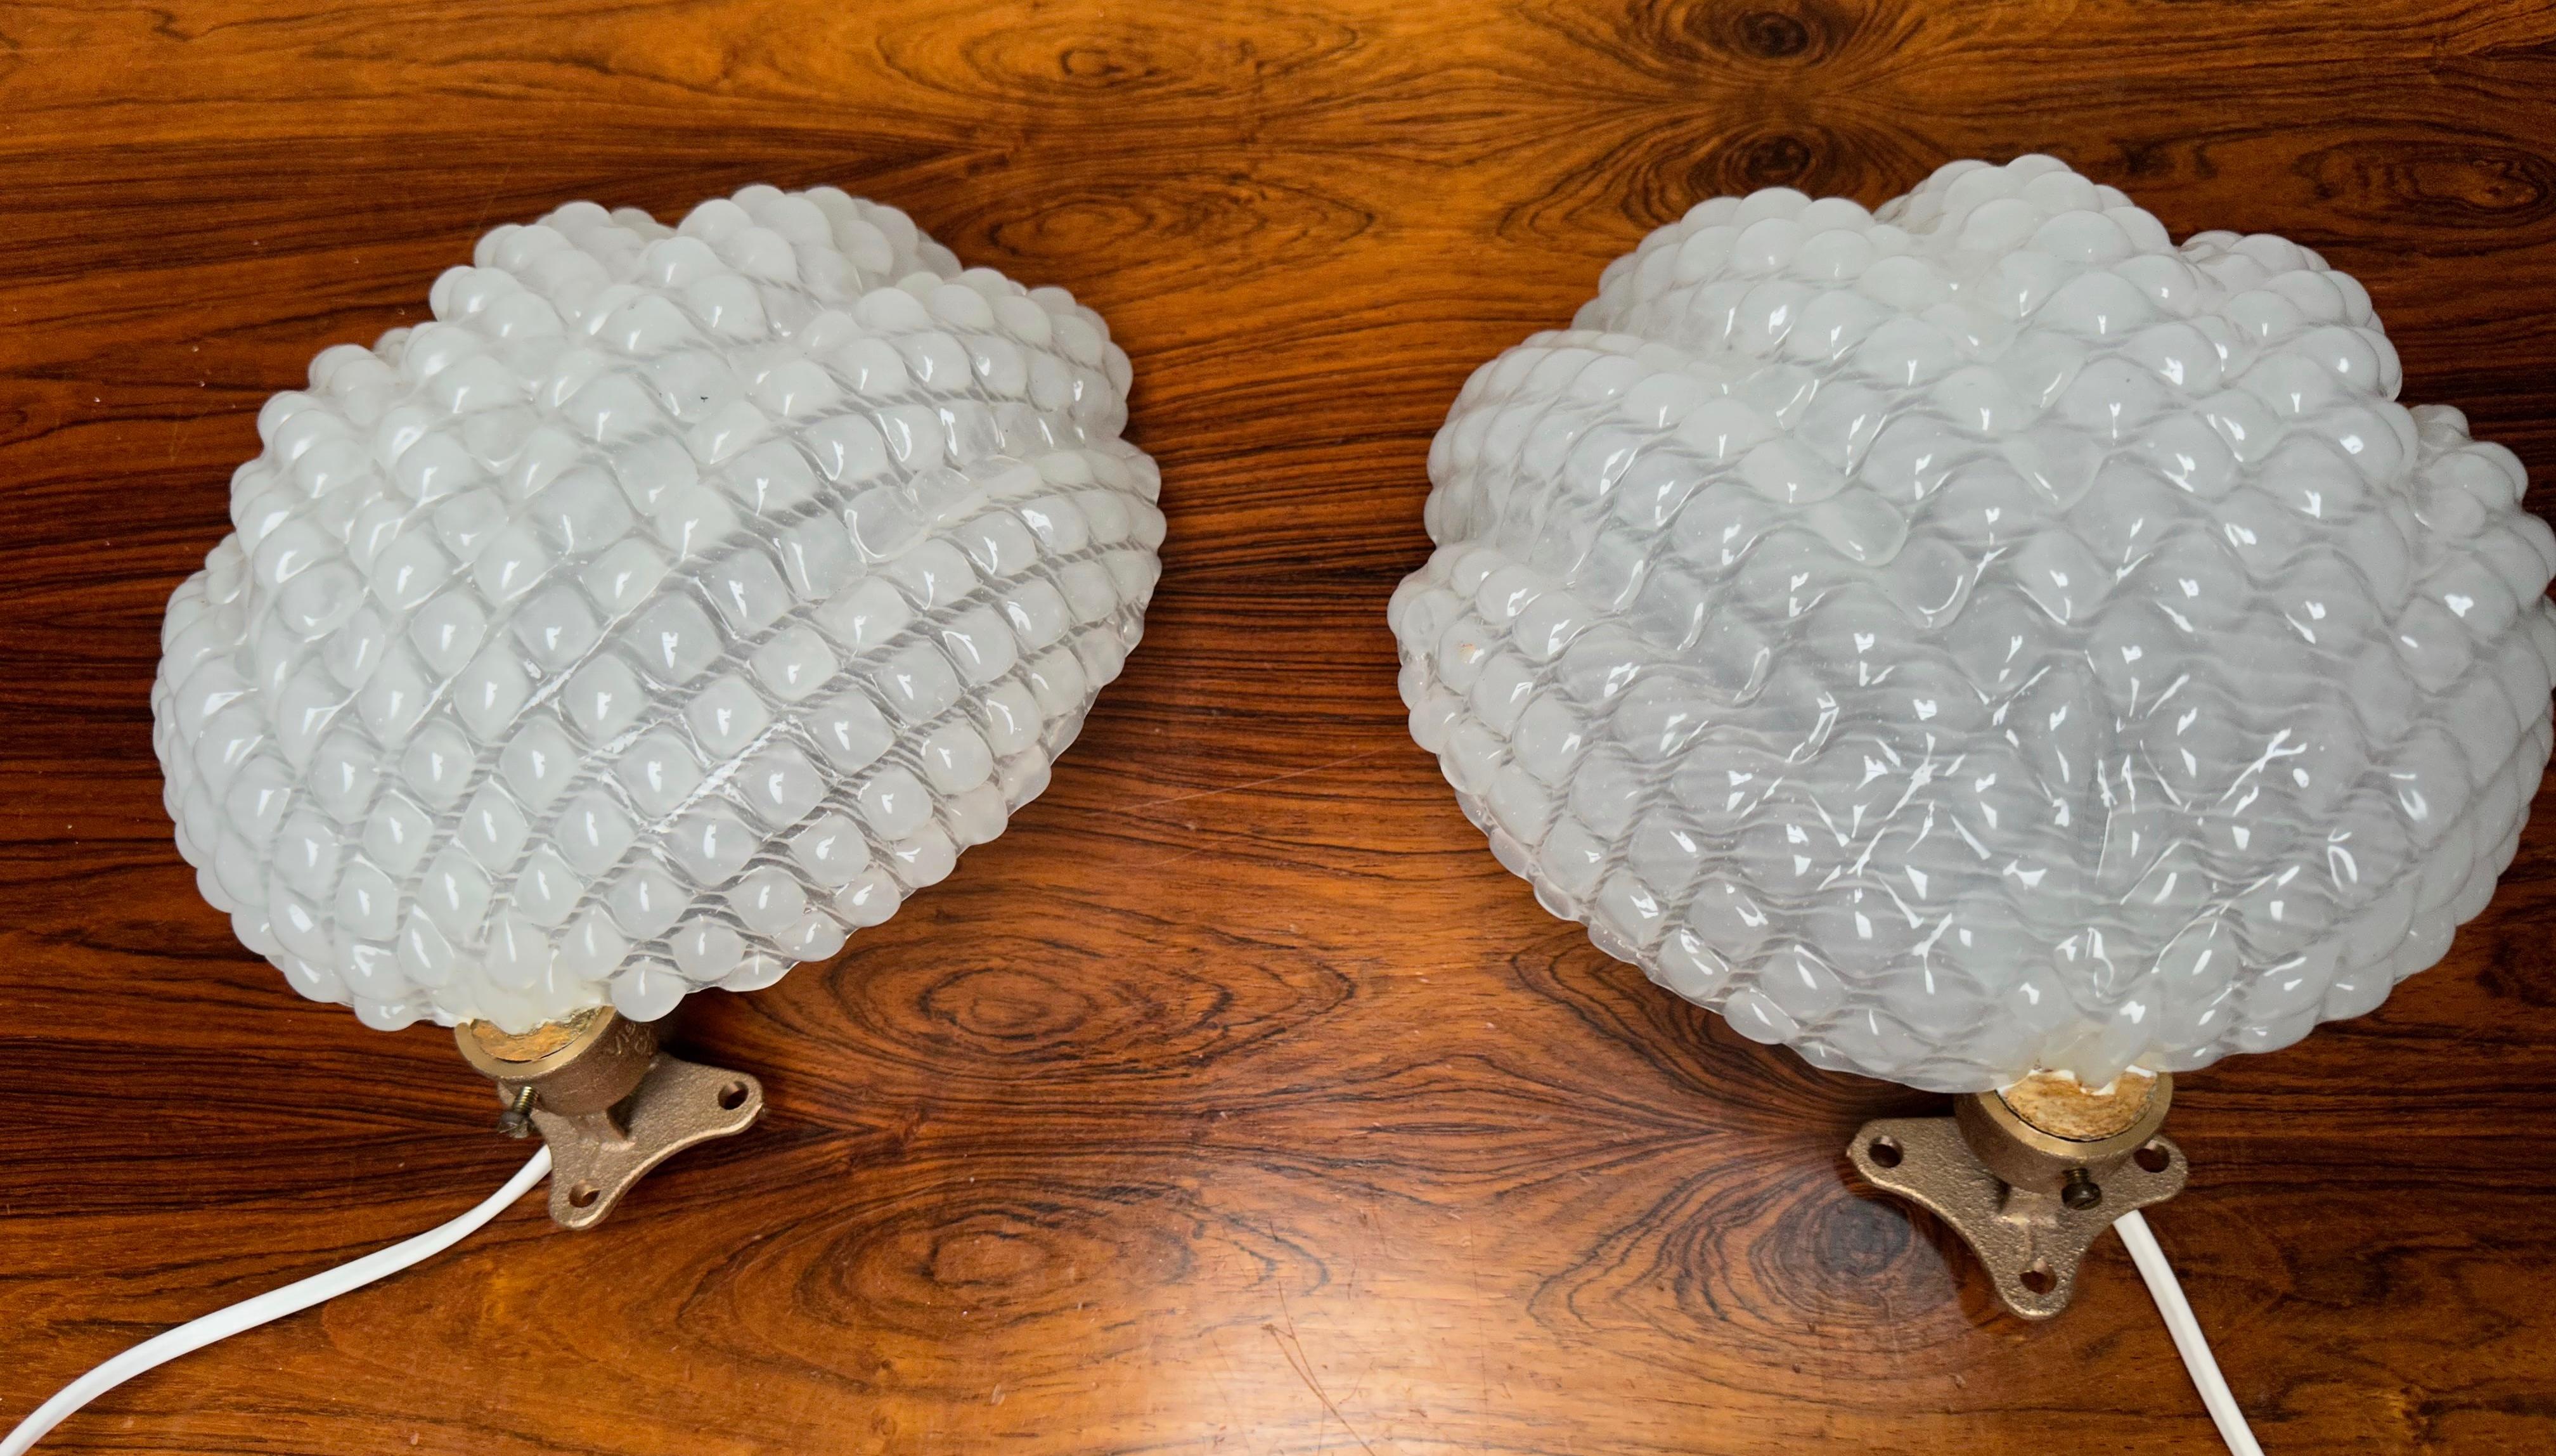 Exceptional Mid-Century Era Pair of Murano Blown Art Glass Scallop Wall Sconces For Sale 8